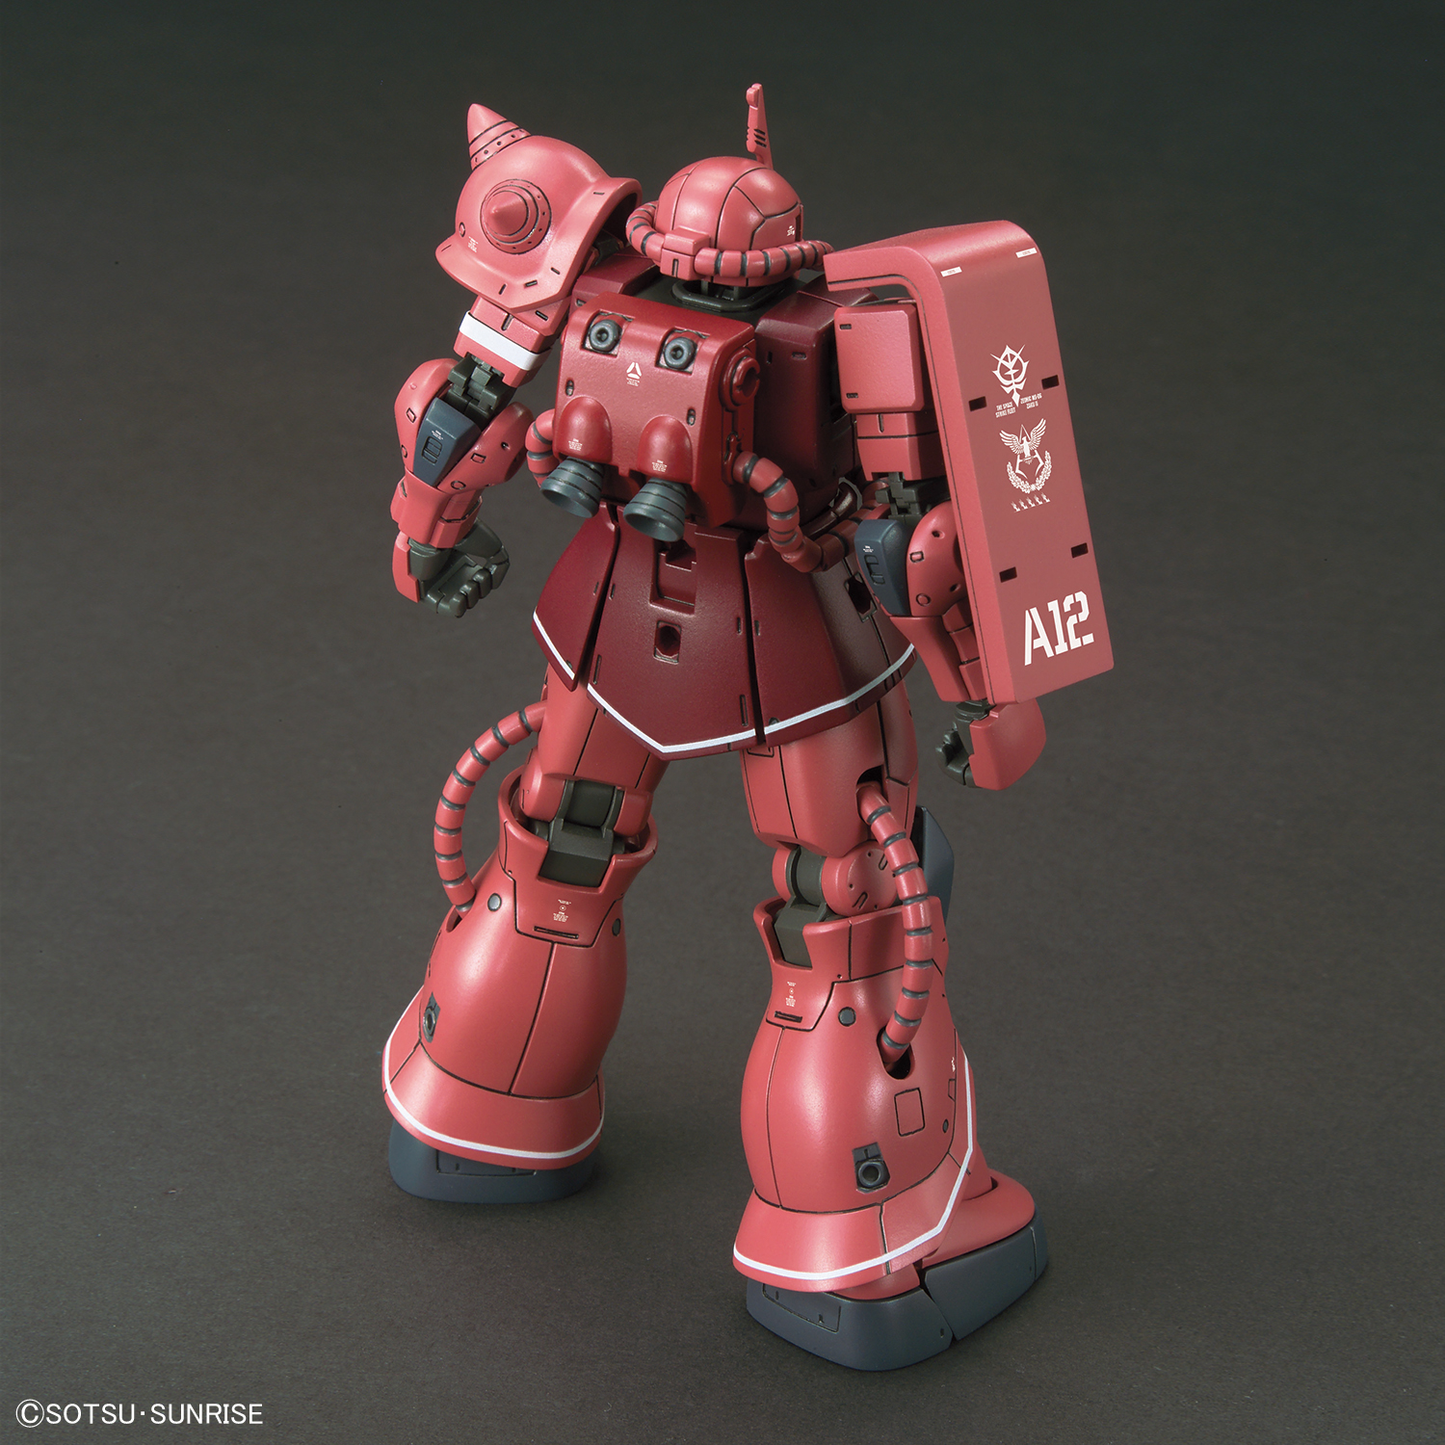 HG 1/144 MS-06S ZAKU II PRINCIPALITY OF ZEON CHAR AZNABLE'S MOBILE SUITS Red Comet Ver